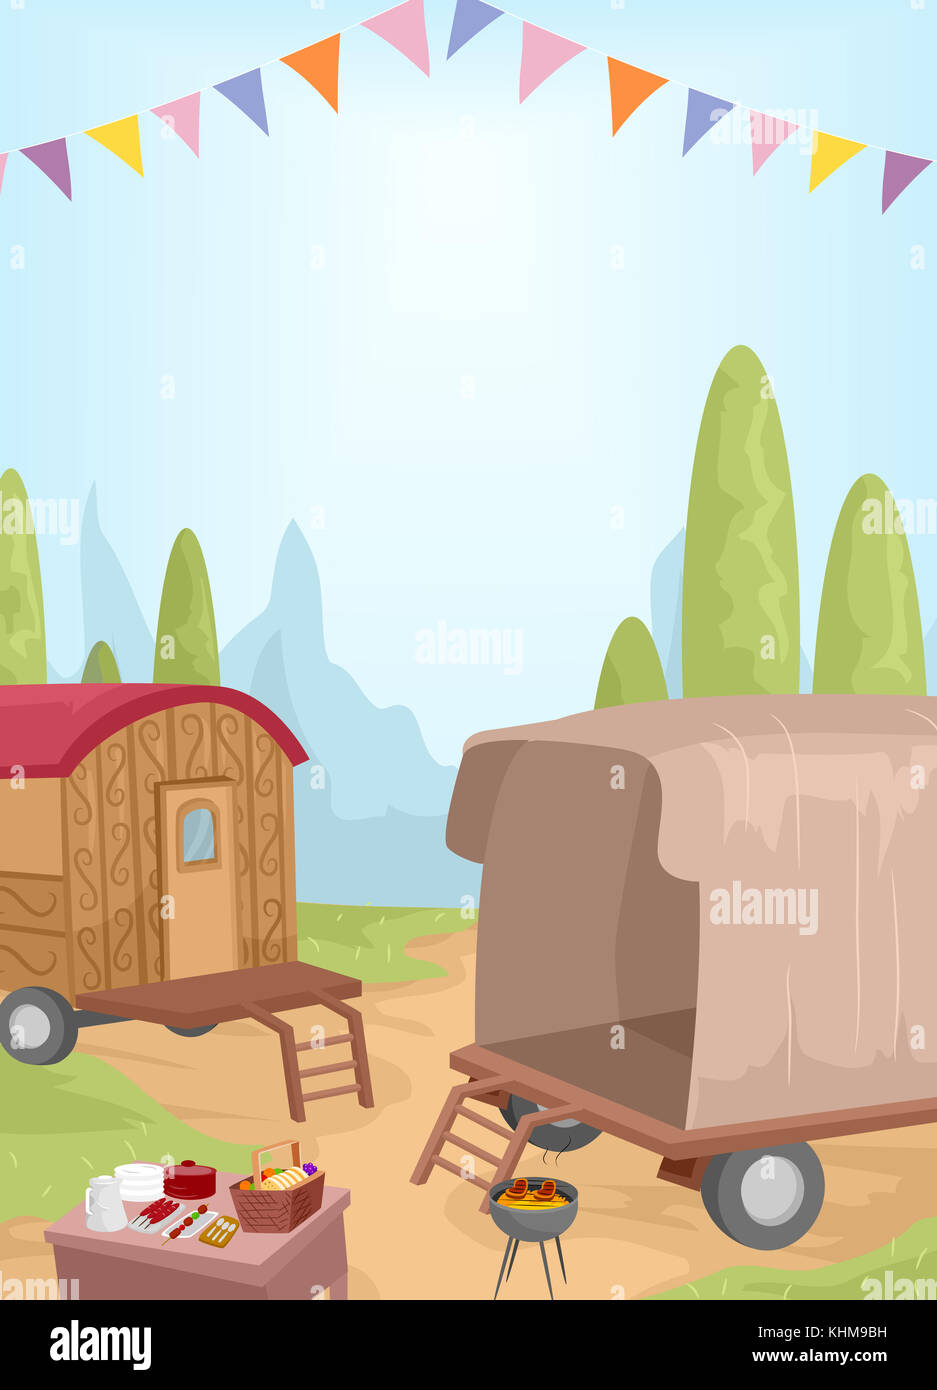 Landscape Illustration Featuring a Caravan Being Used for an Outdoor Picnic Stock Photo